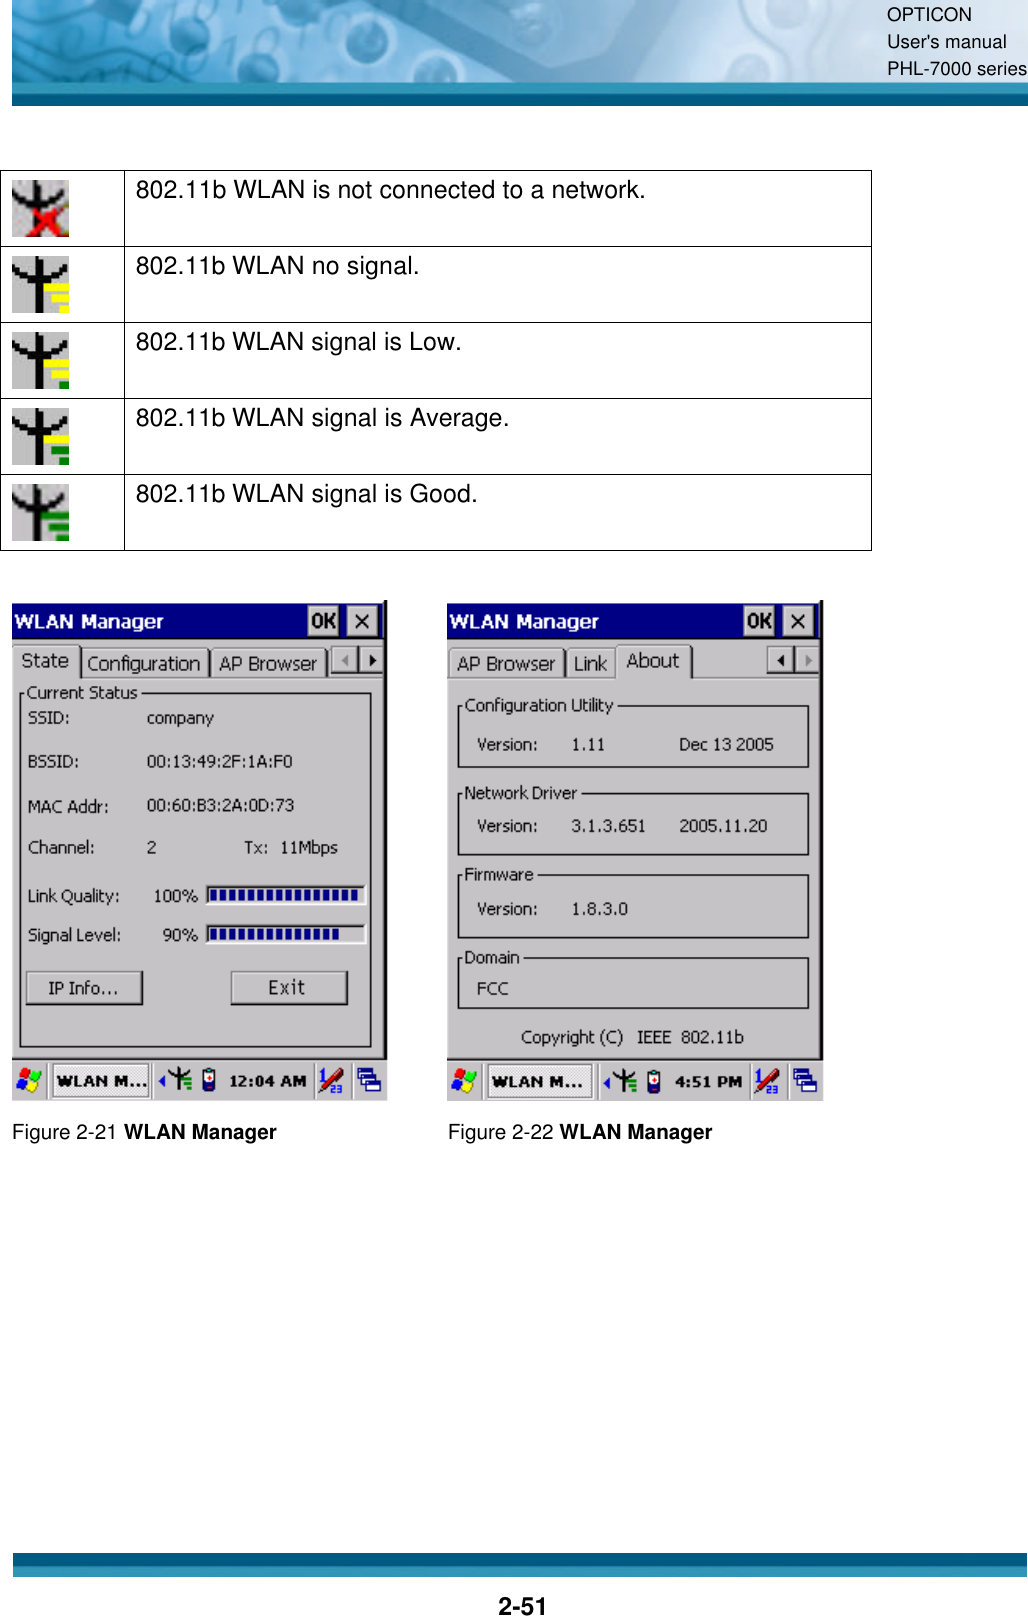 OPTICON User&apos;s manual PHL-7000 series    2-51   802.11b WLAN is not connected to a network.  802.11b WLAN no signal.  802.11b WLAN signal is Low.  802.11b WLAN signal is Average.  802.11b WLAN signal is Good.    Figure 2-21 WLAN Manager Figure 2-22 WLAN Manager    